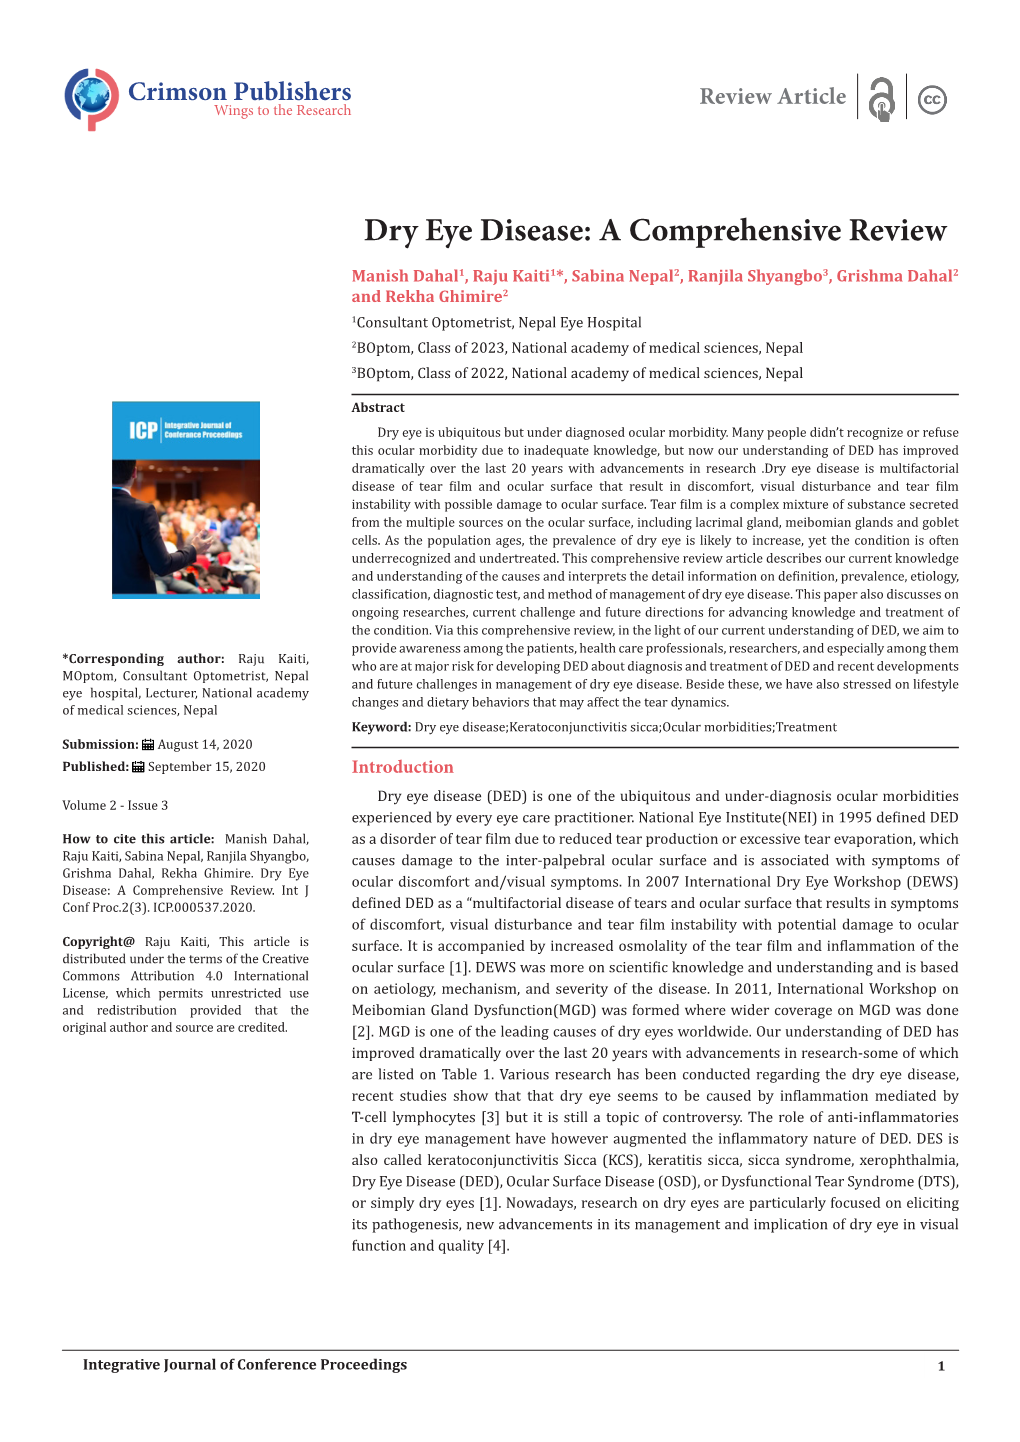 Dry Eye Disease: a Comprehensive Review